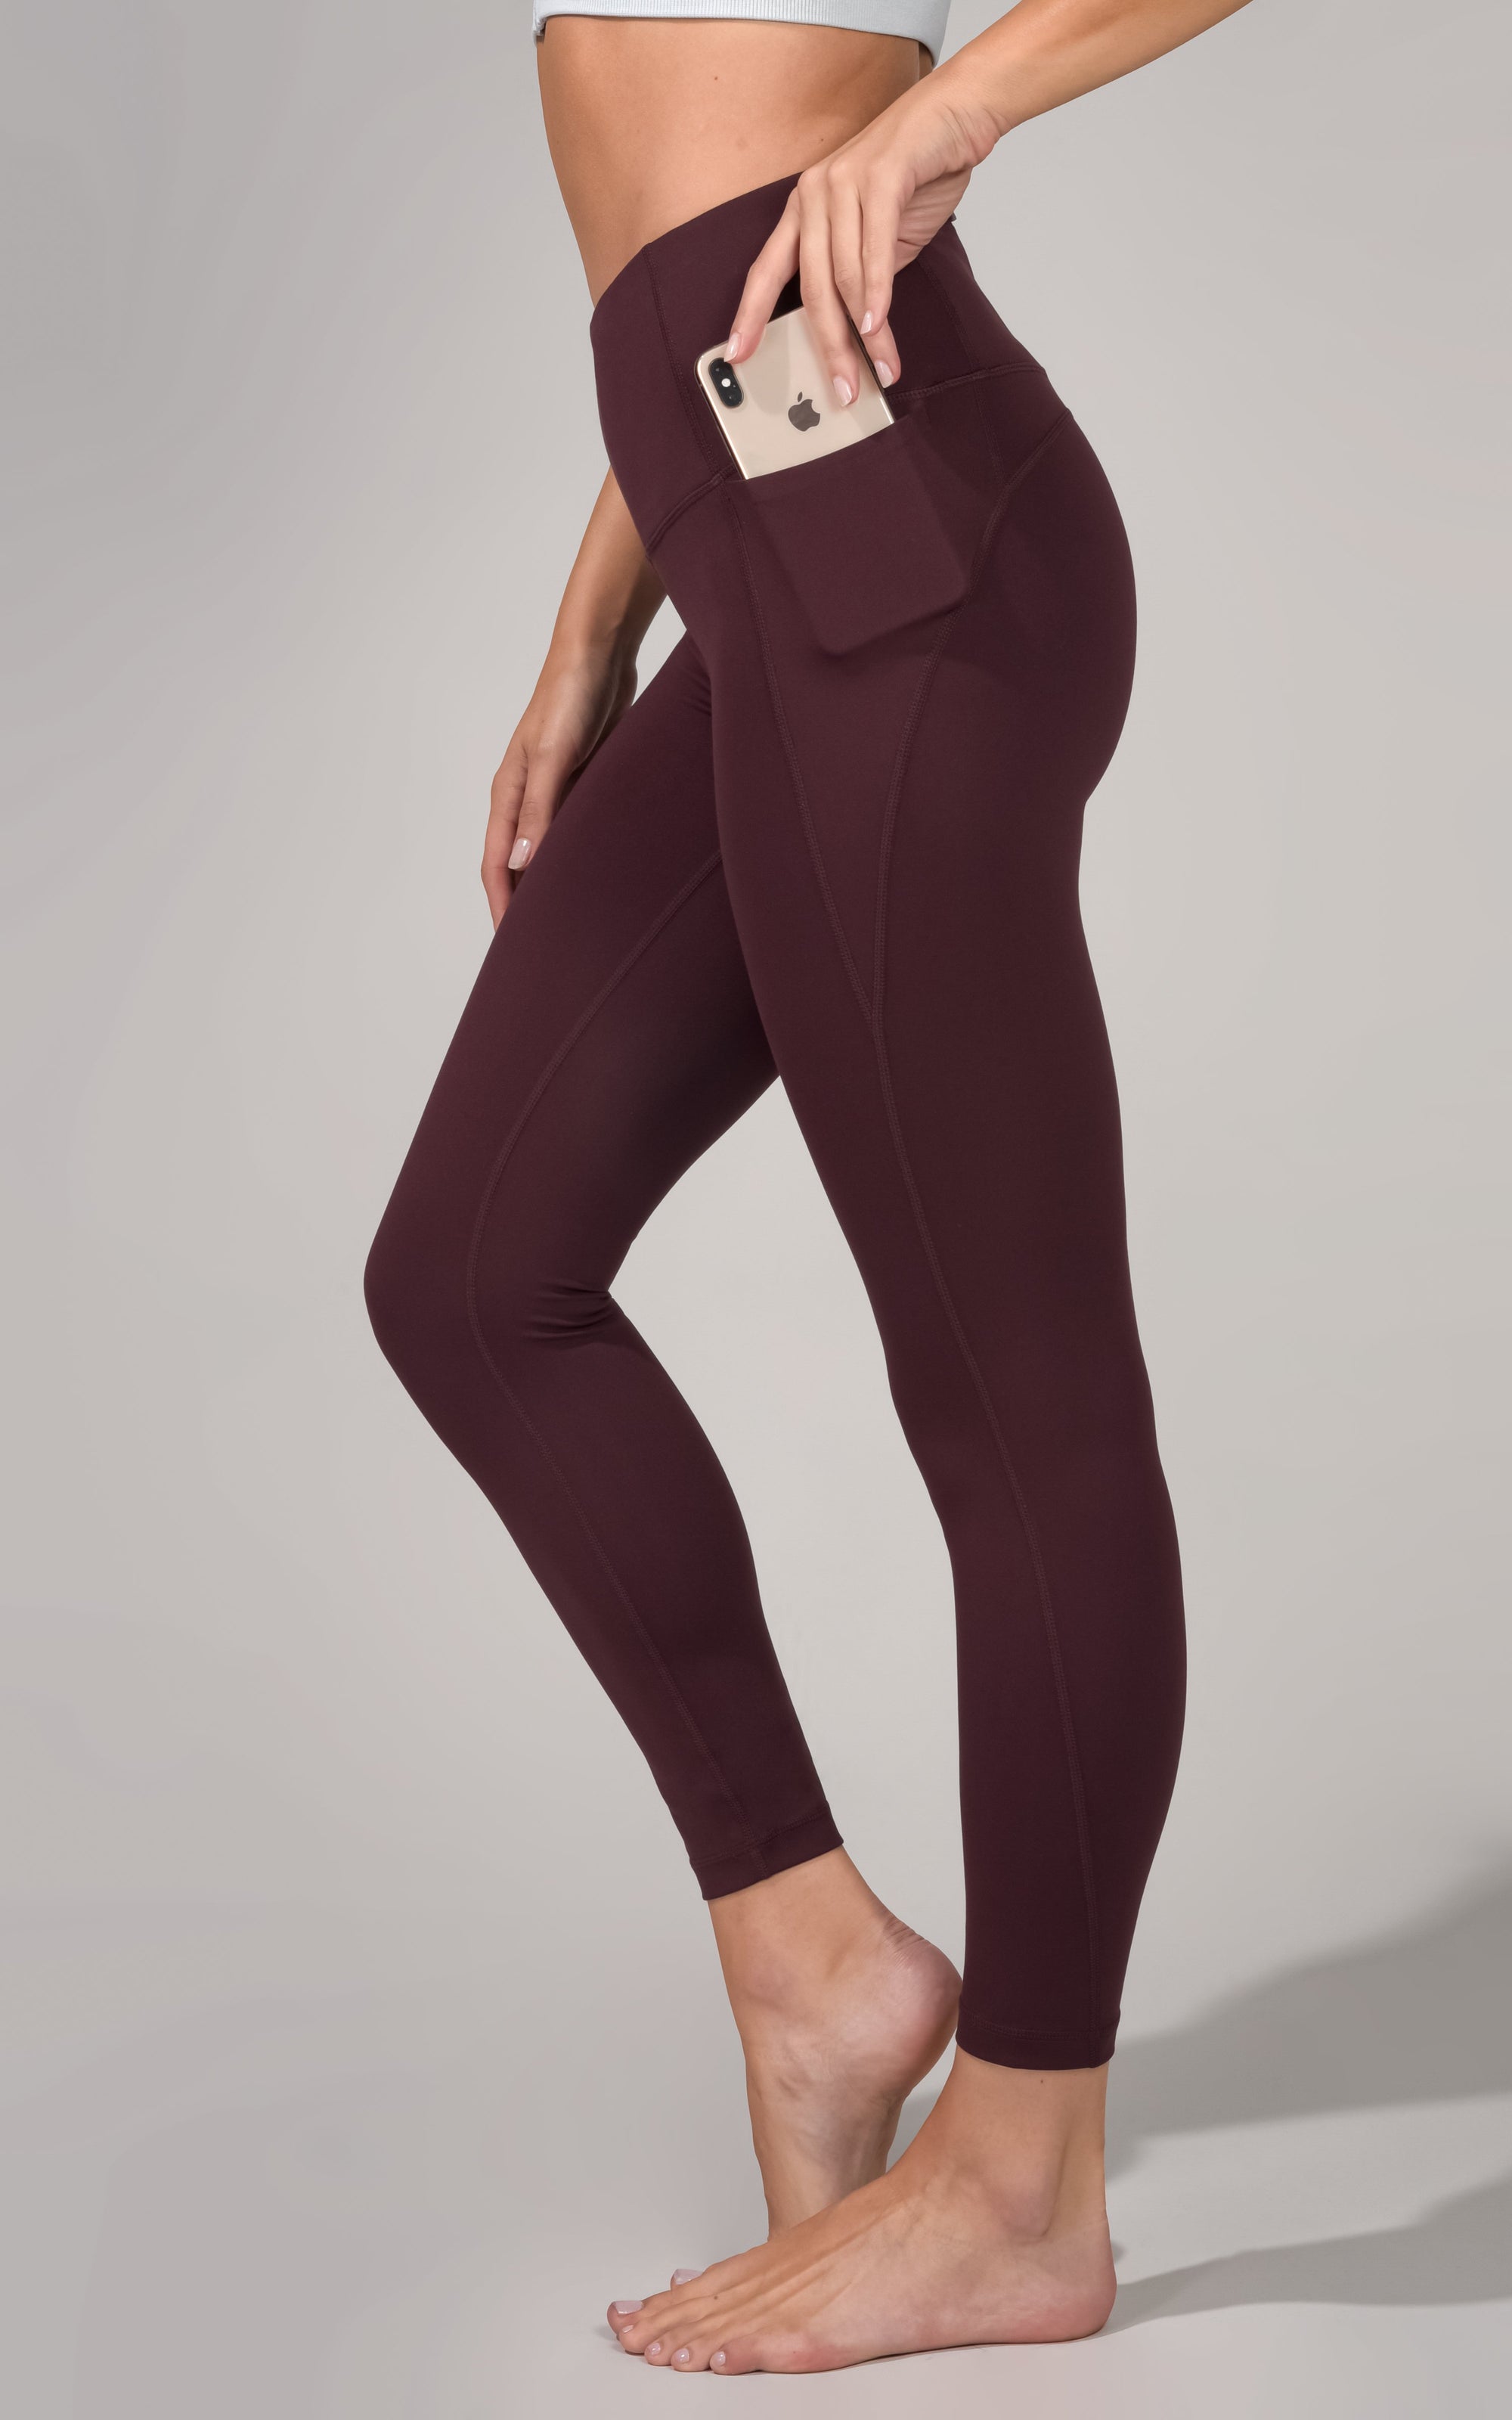 Yogalicious LUX LEGGING WITH POCKET XS